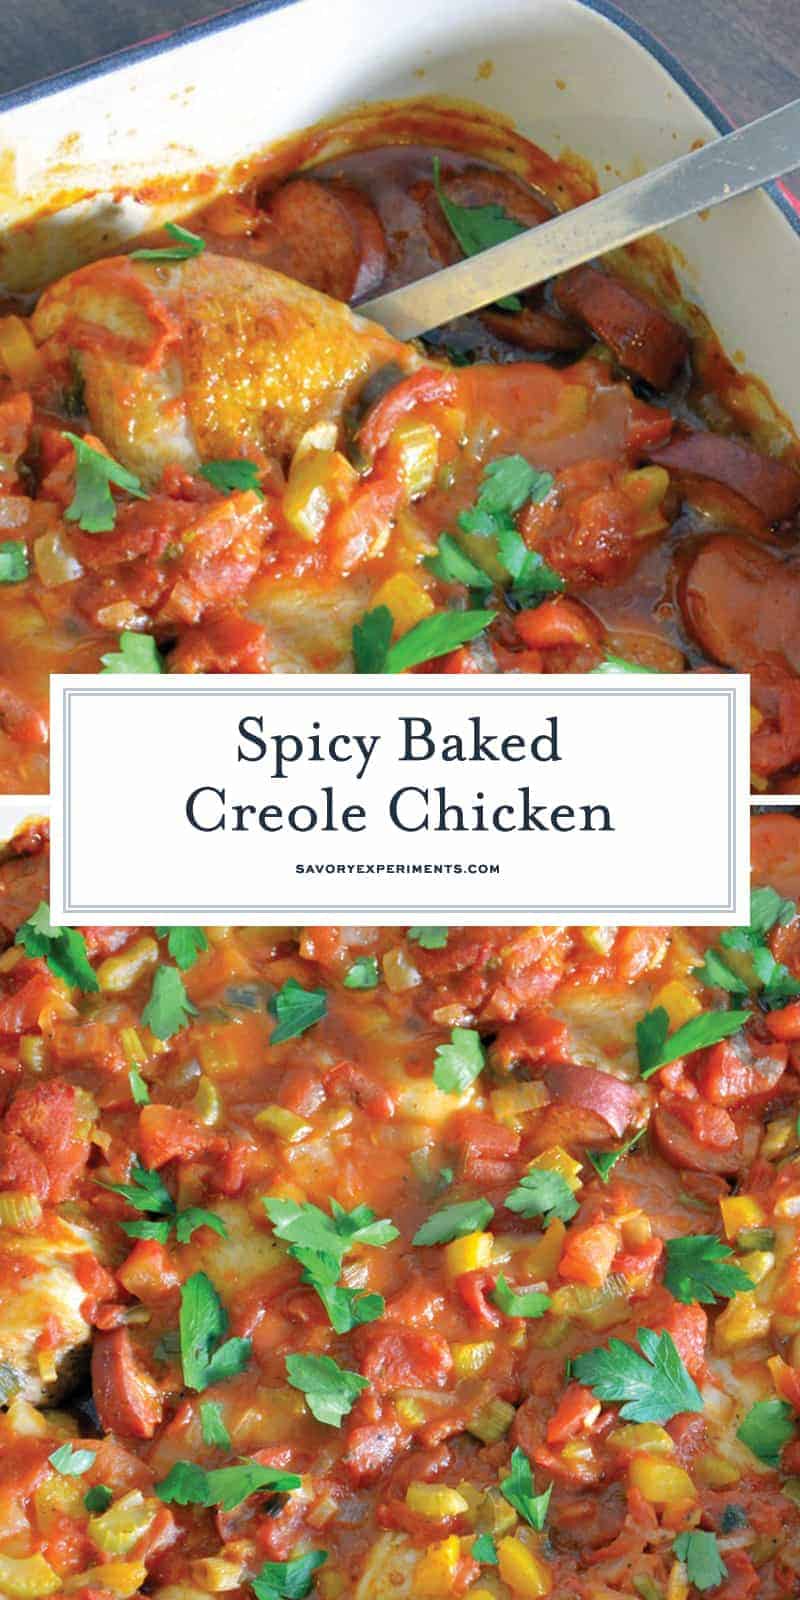 Creole Chicken is a baked chicken recipe using a spicy tomato-based sauce with vegetables and spices. Serve over rice. #spicybakedchicken www.savoryexperiments.com